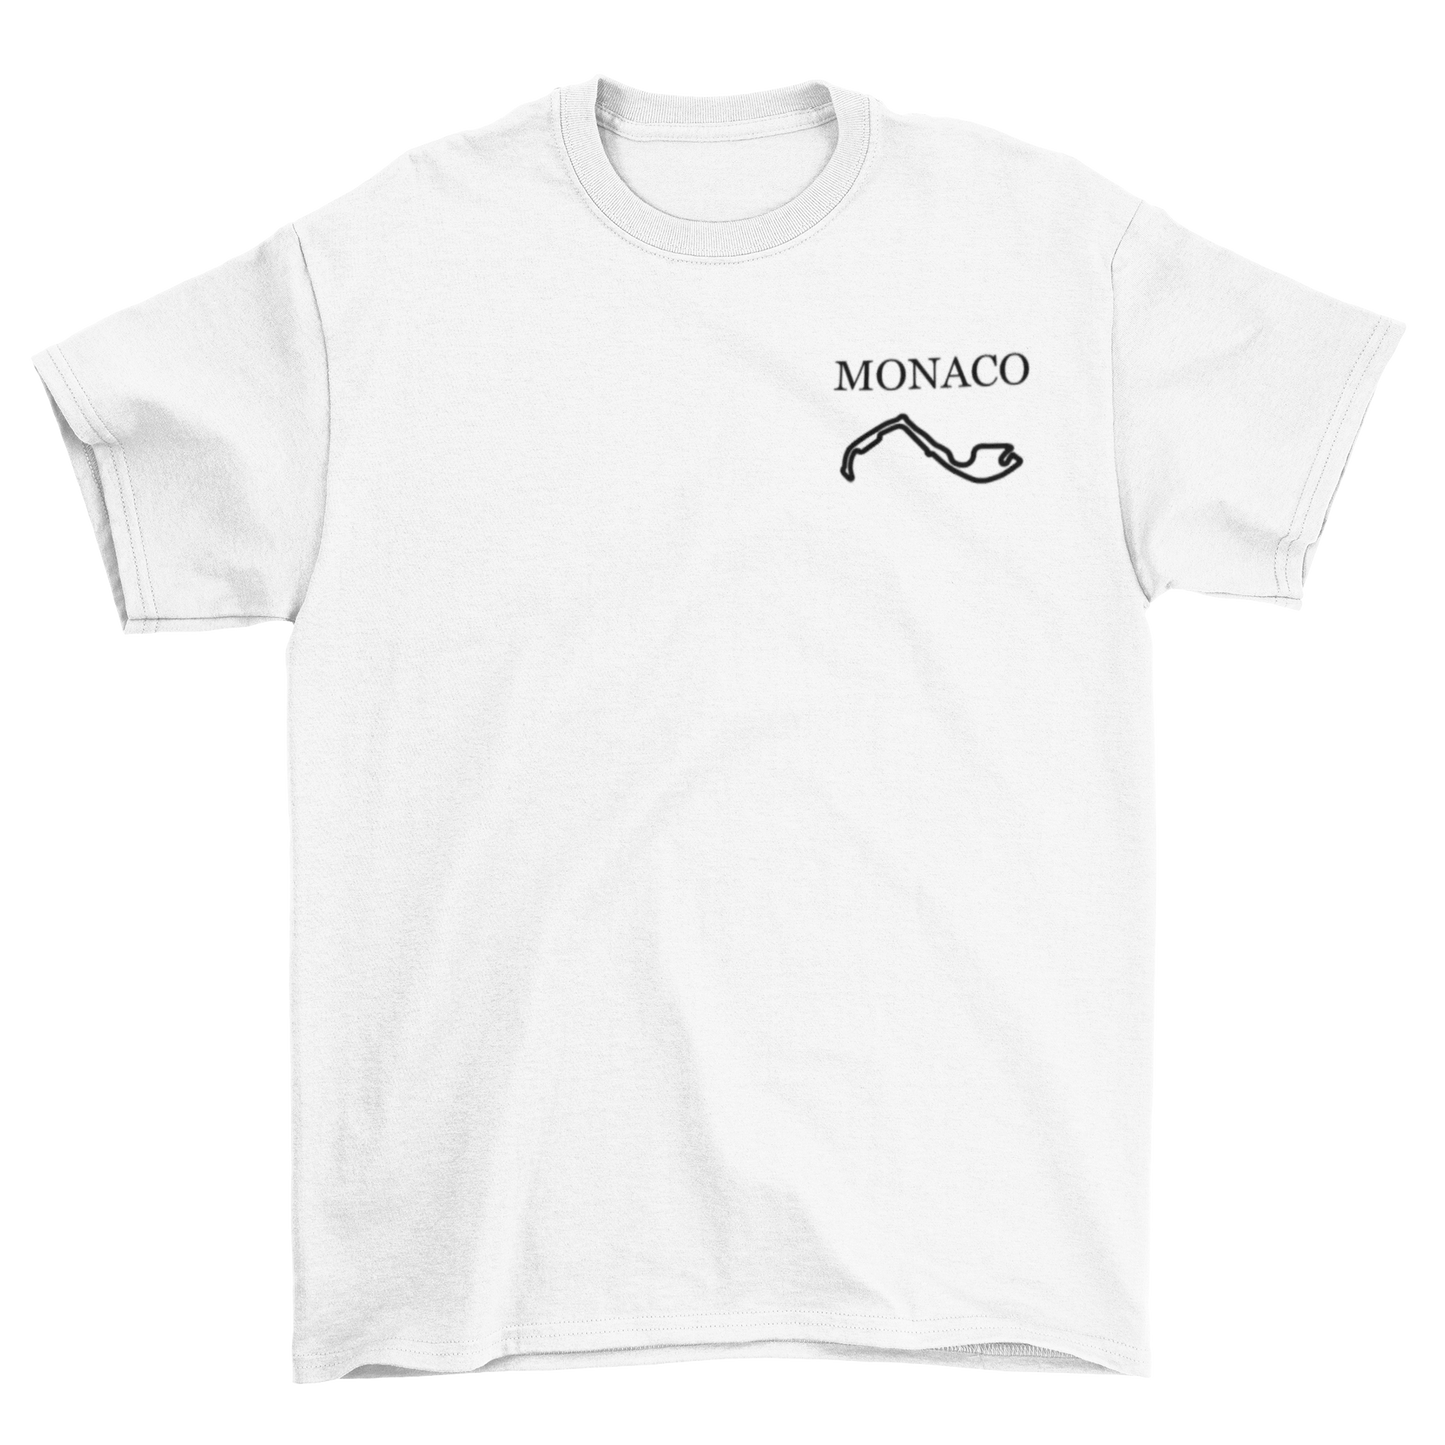 Forever The King of Monaco Tee